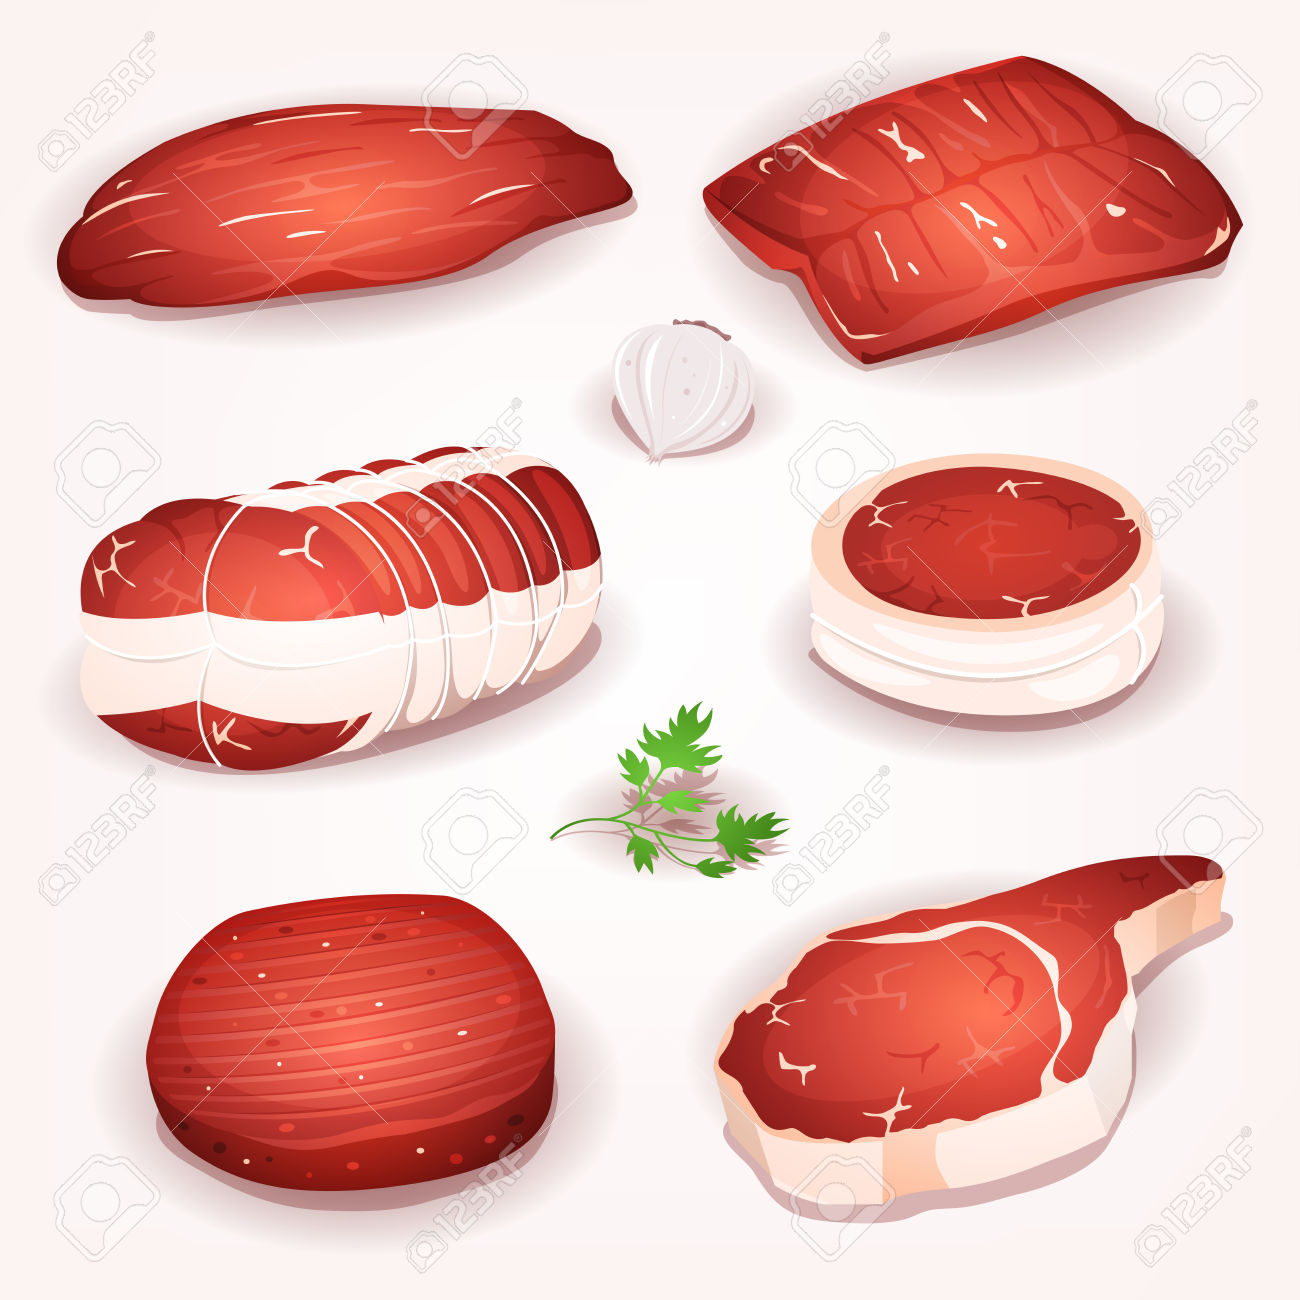 Pieces of meat clipart 20 free Cliparts | Download images on Clipground